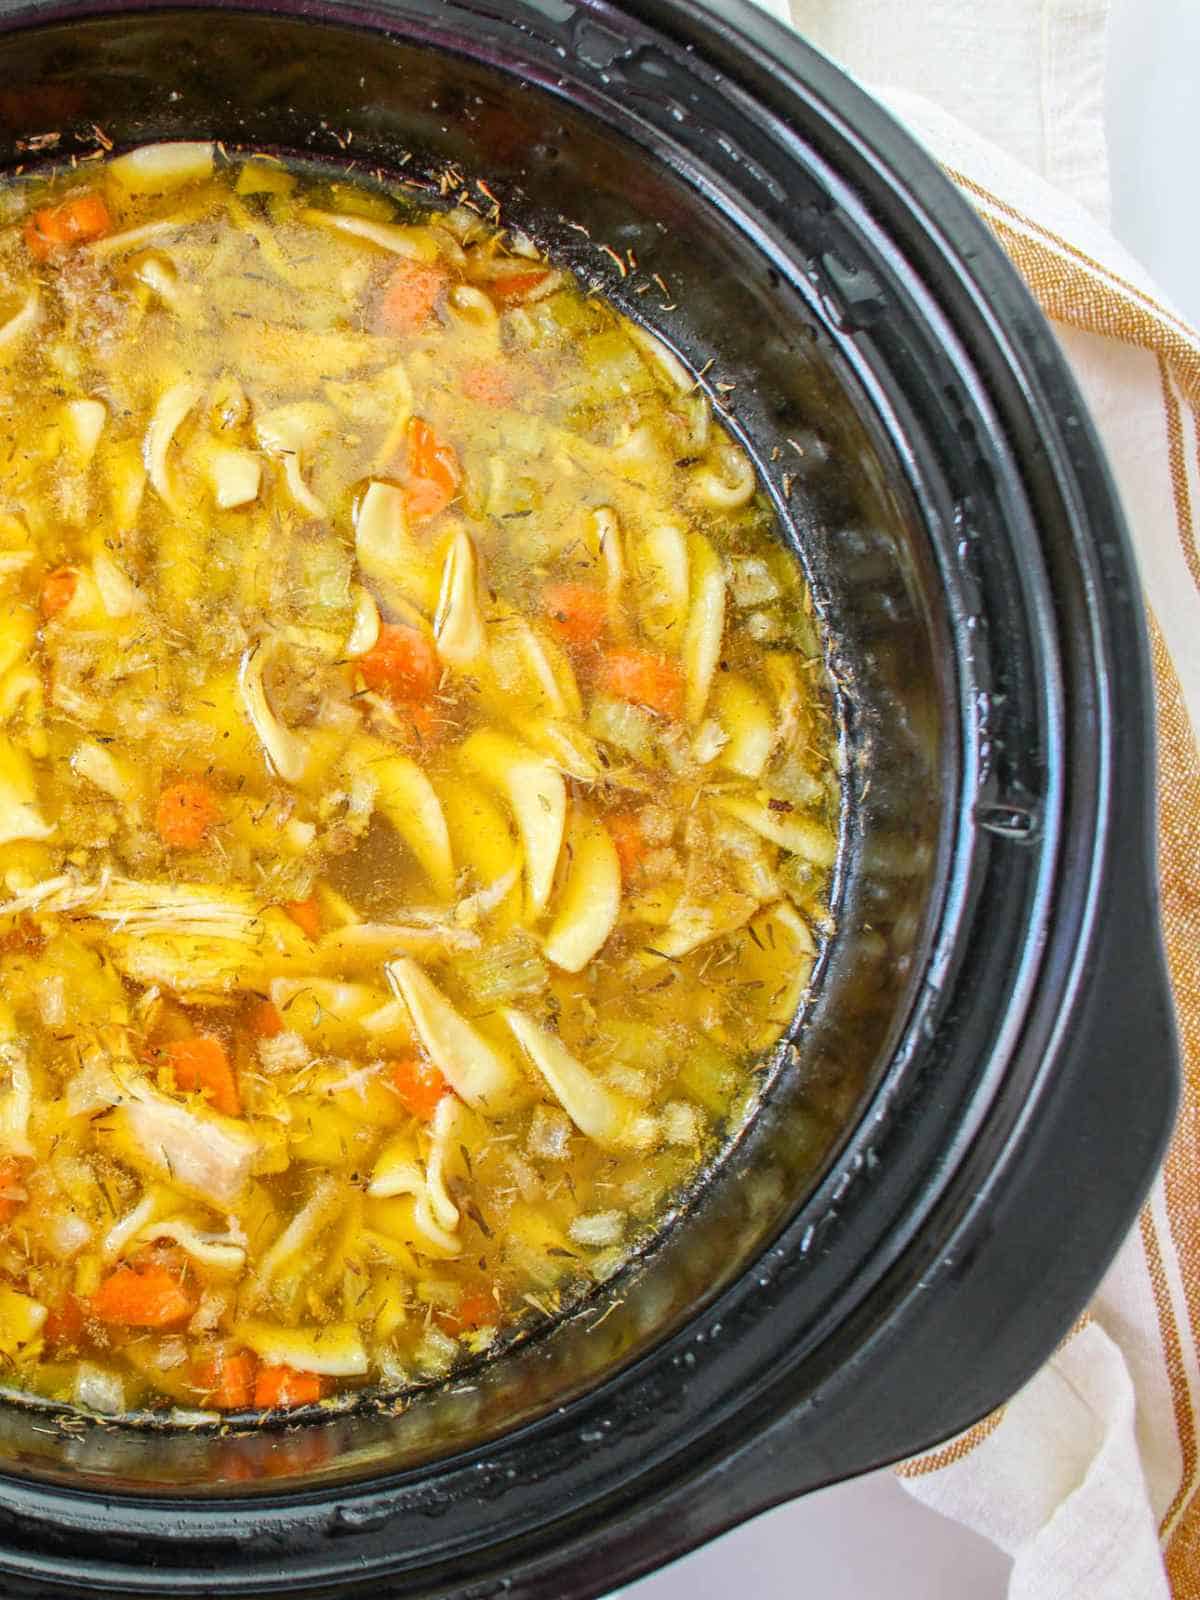 carrots, celery, onion, chicken broth, chicken, and noodles added to a crockpot.